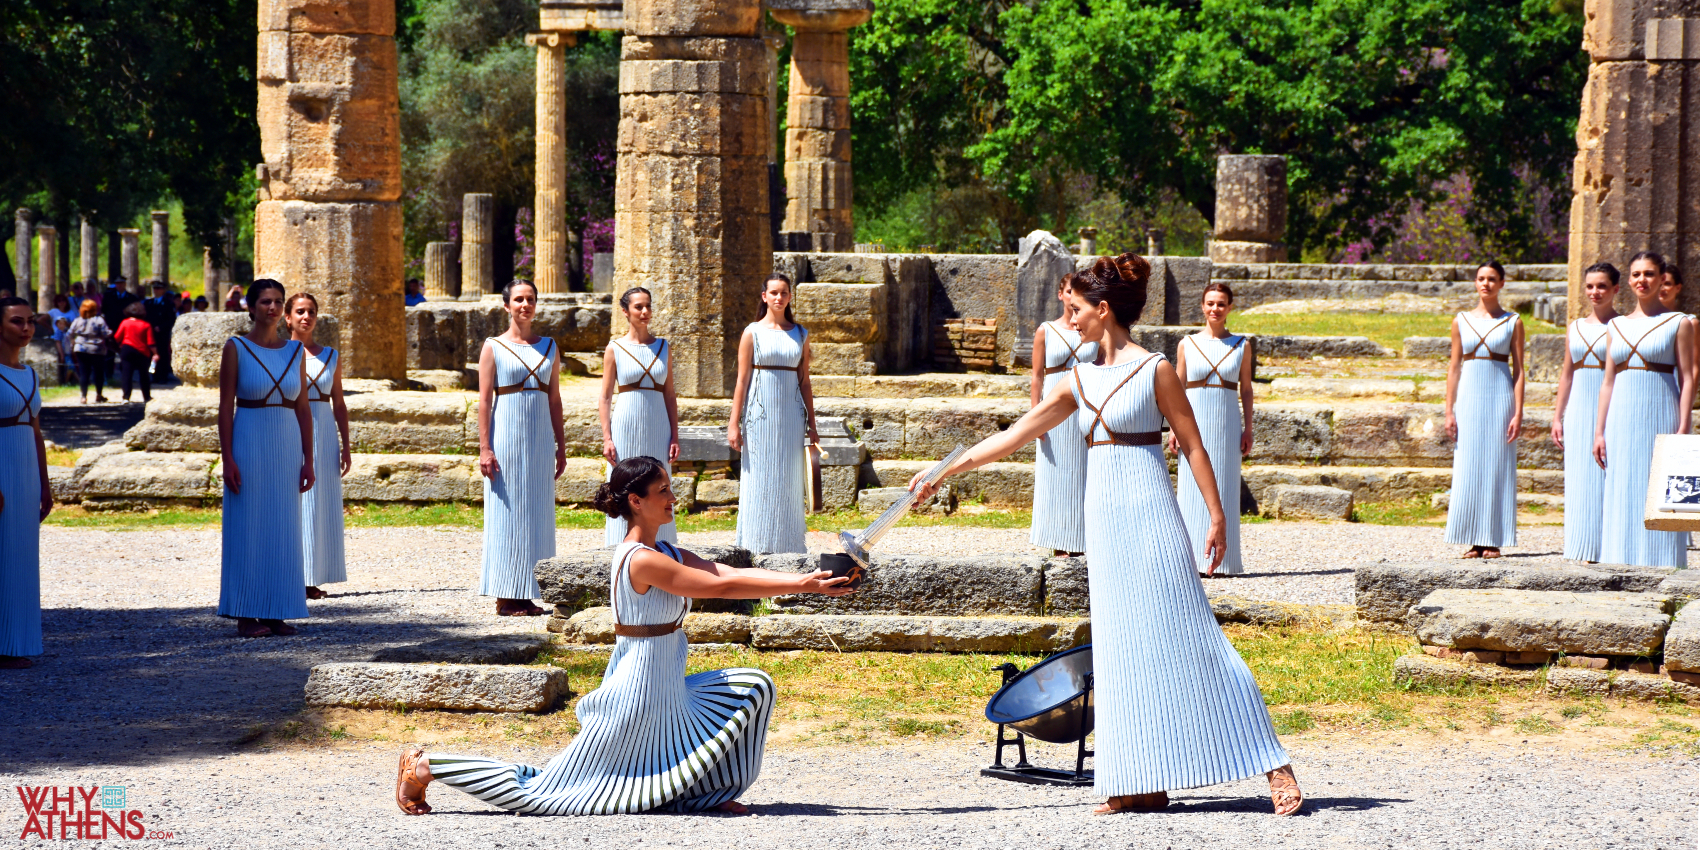 Olympic Flame Why Athens